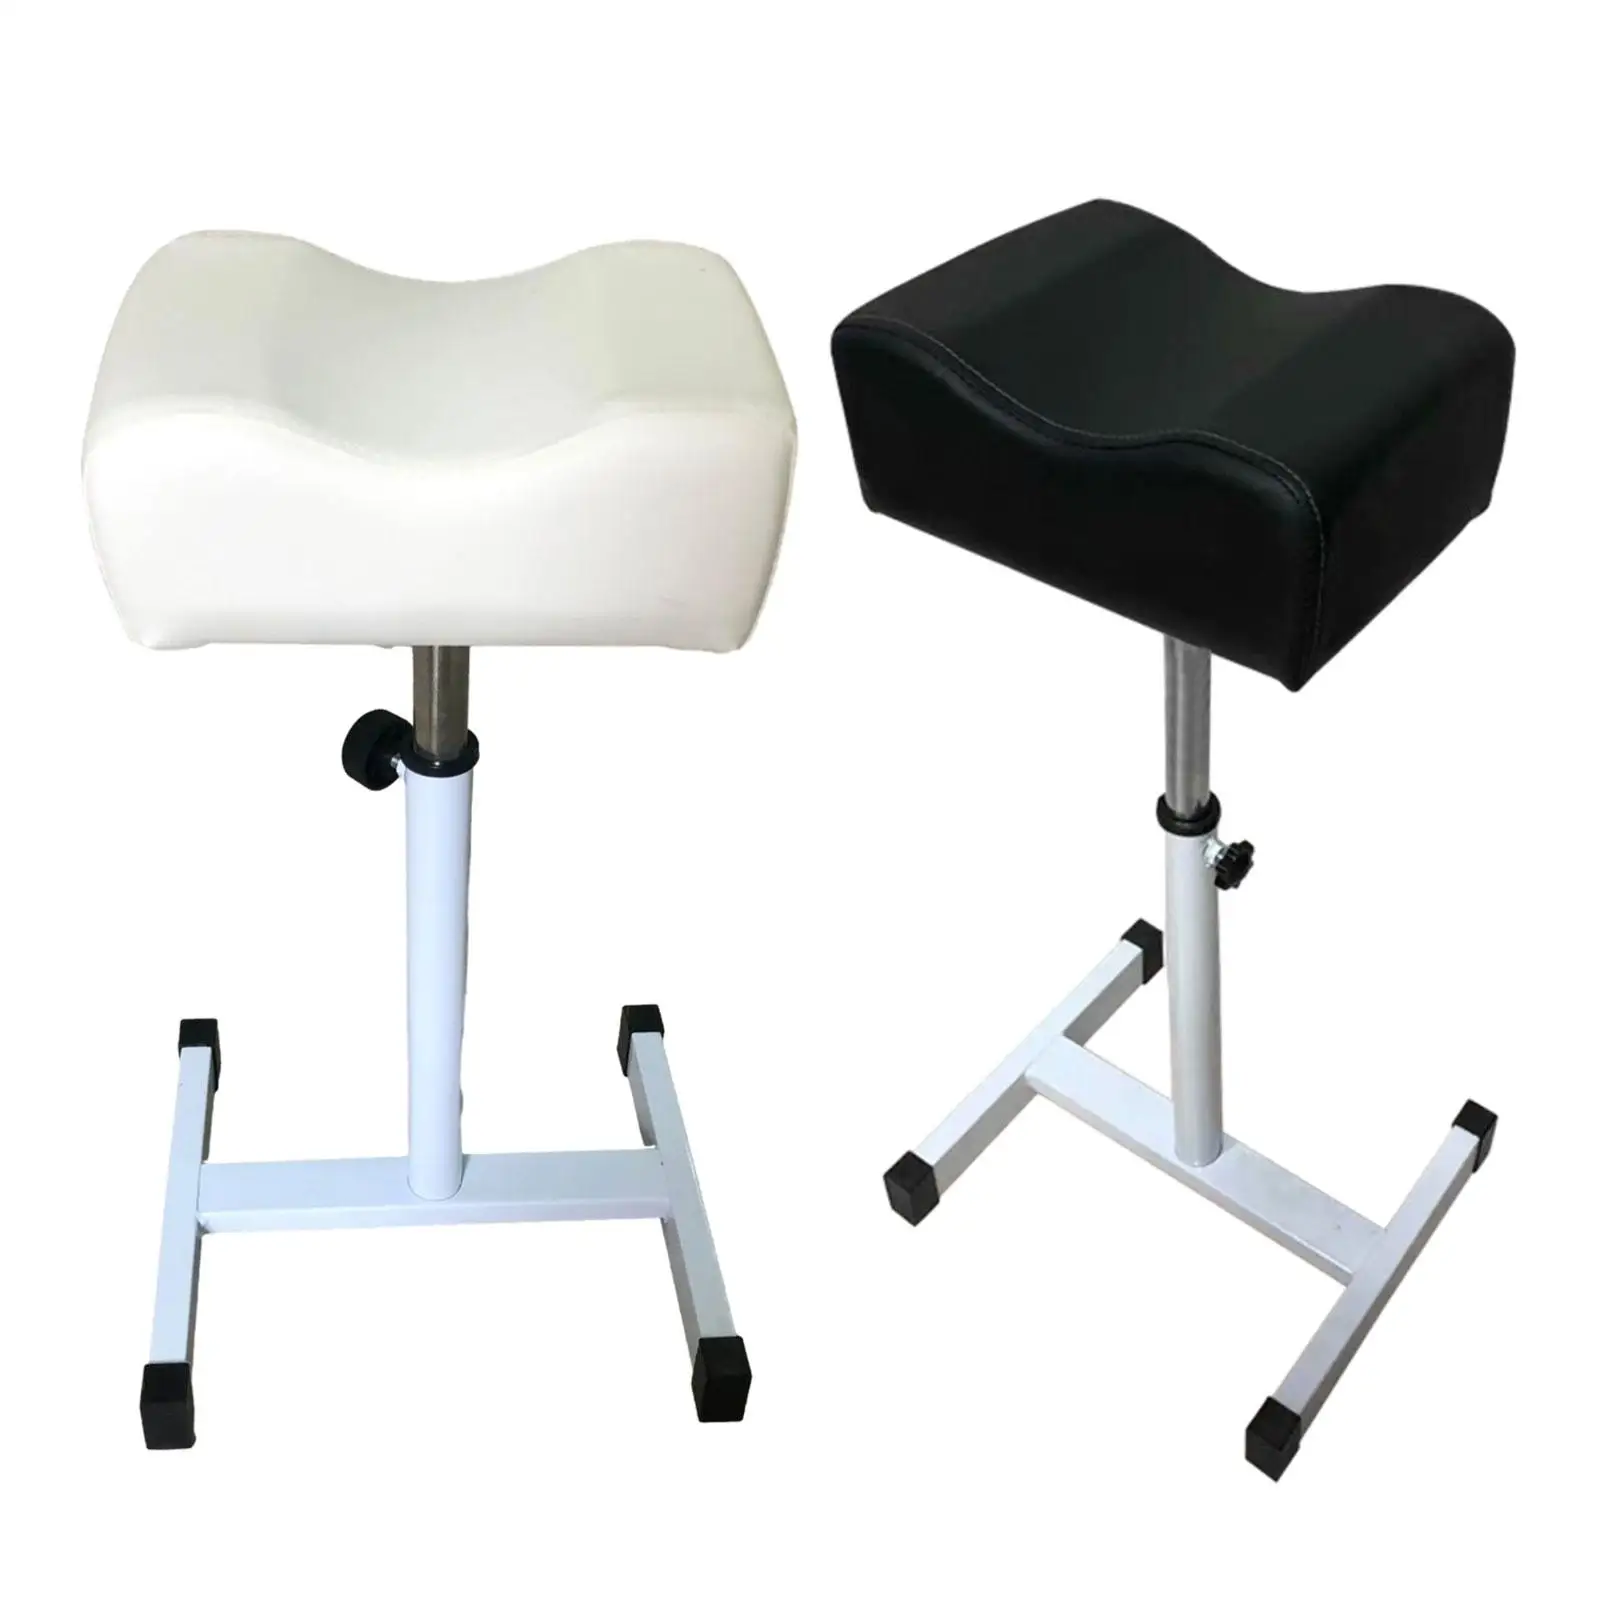 Pedicure Manicure Footrest Foot Nail Beauty Stool Stand Pedicure Nail Equipment Comfortable for Salon Home Pedicure SPA